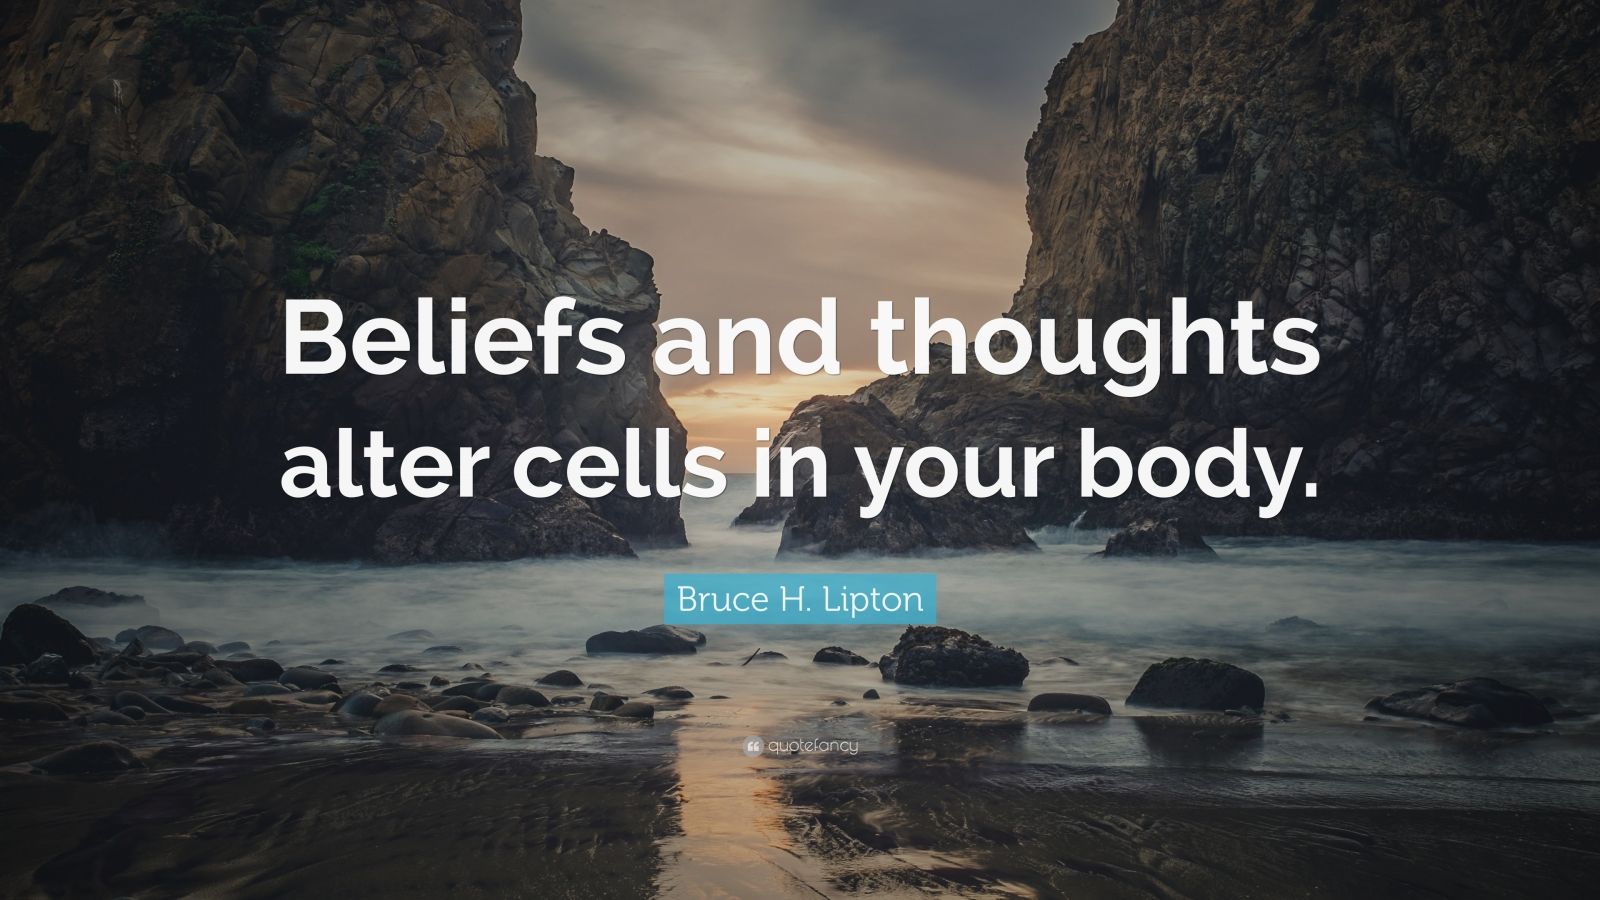 Bruce H. Lipton Quotes (42 wallpapers) - Quotefancy